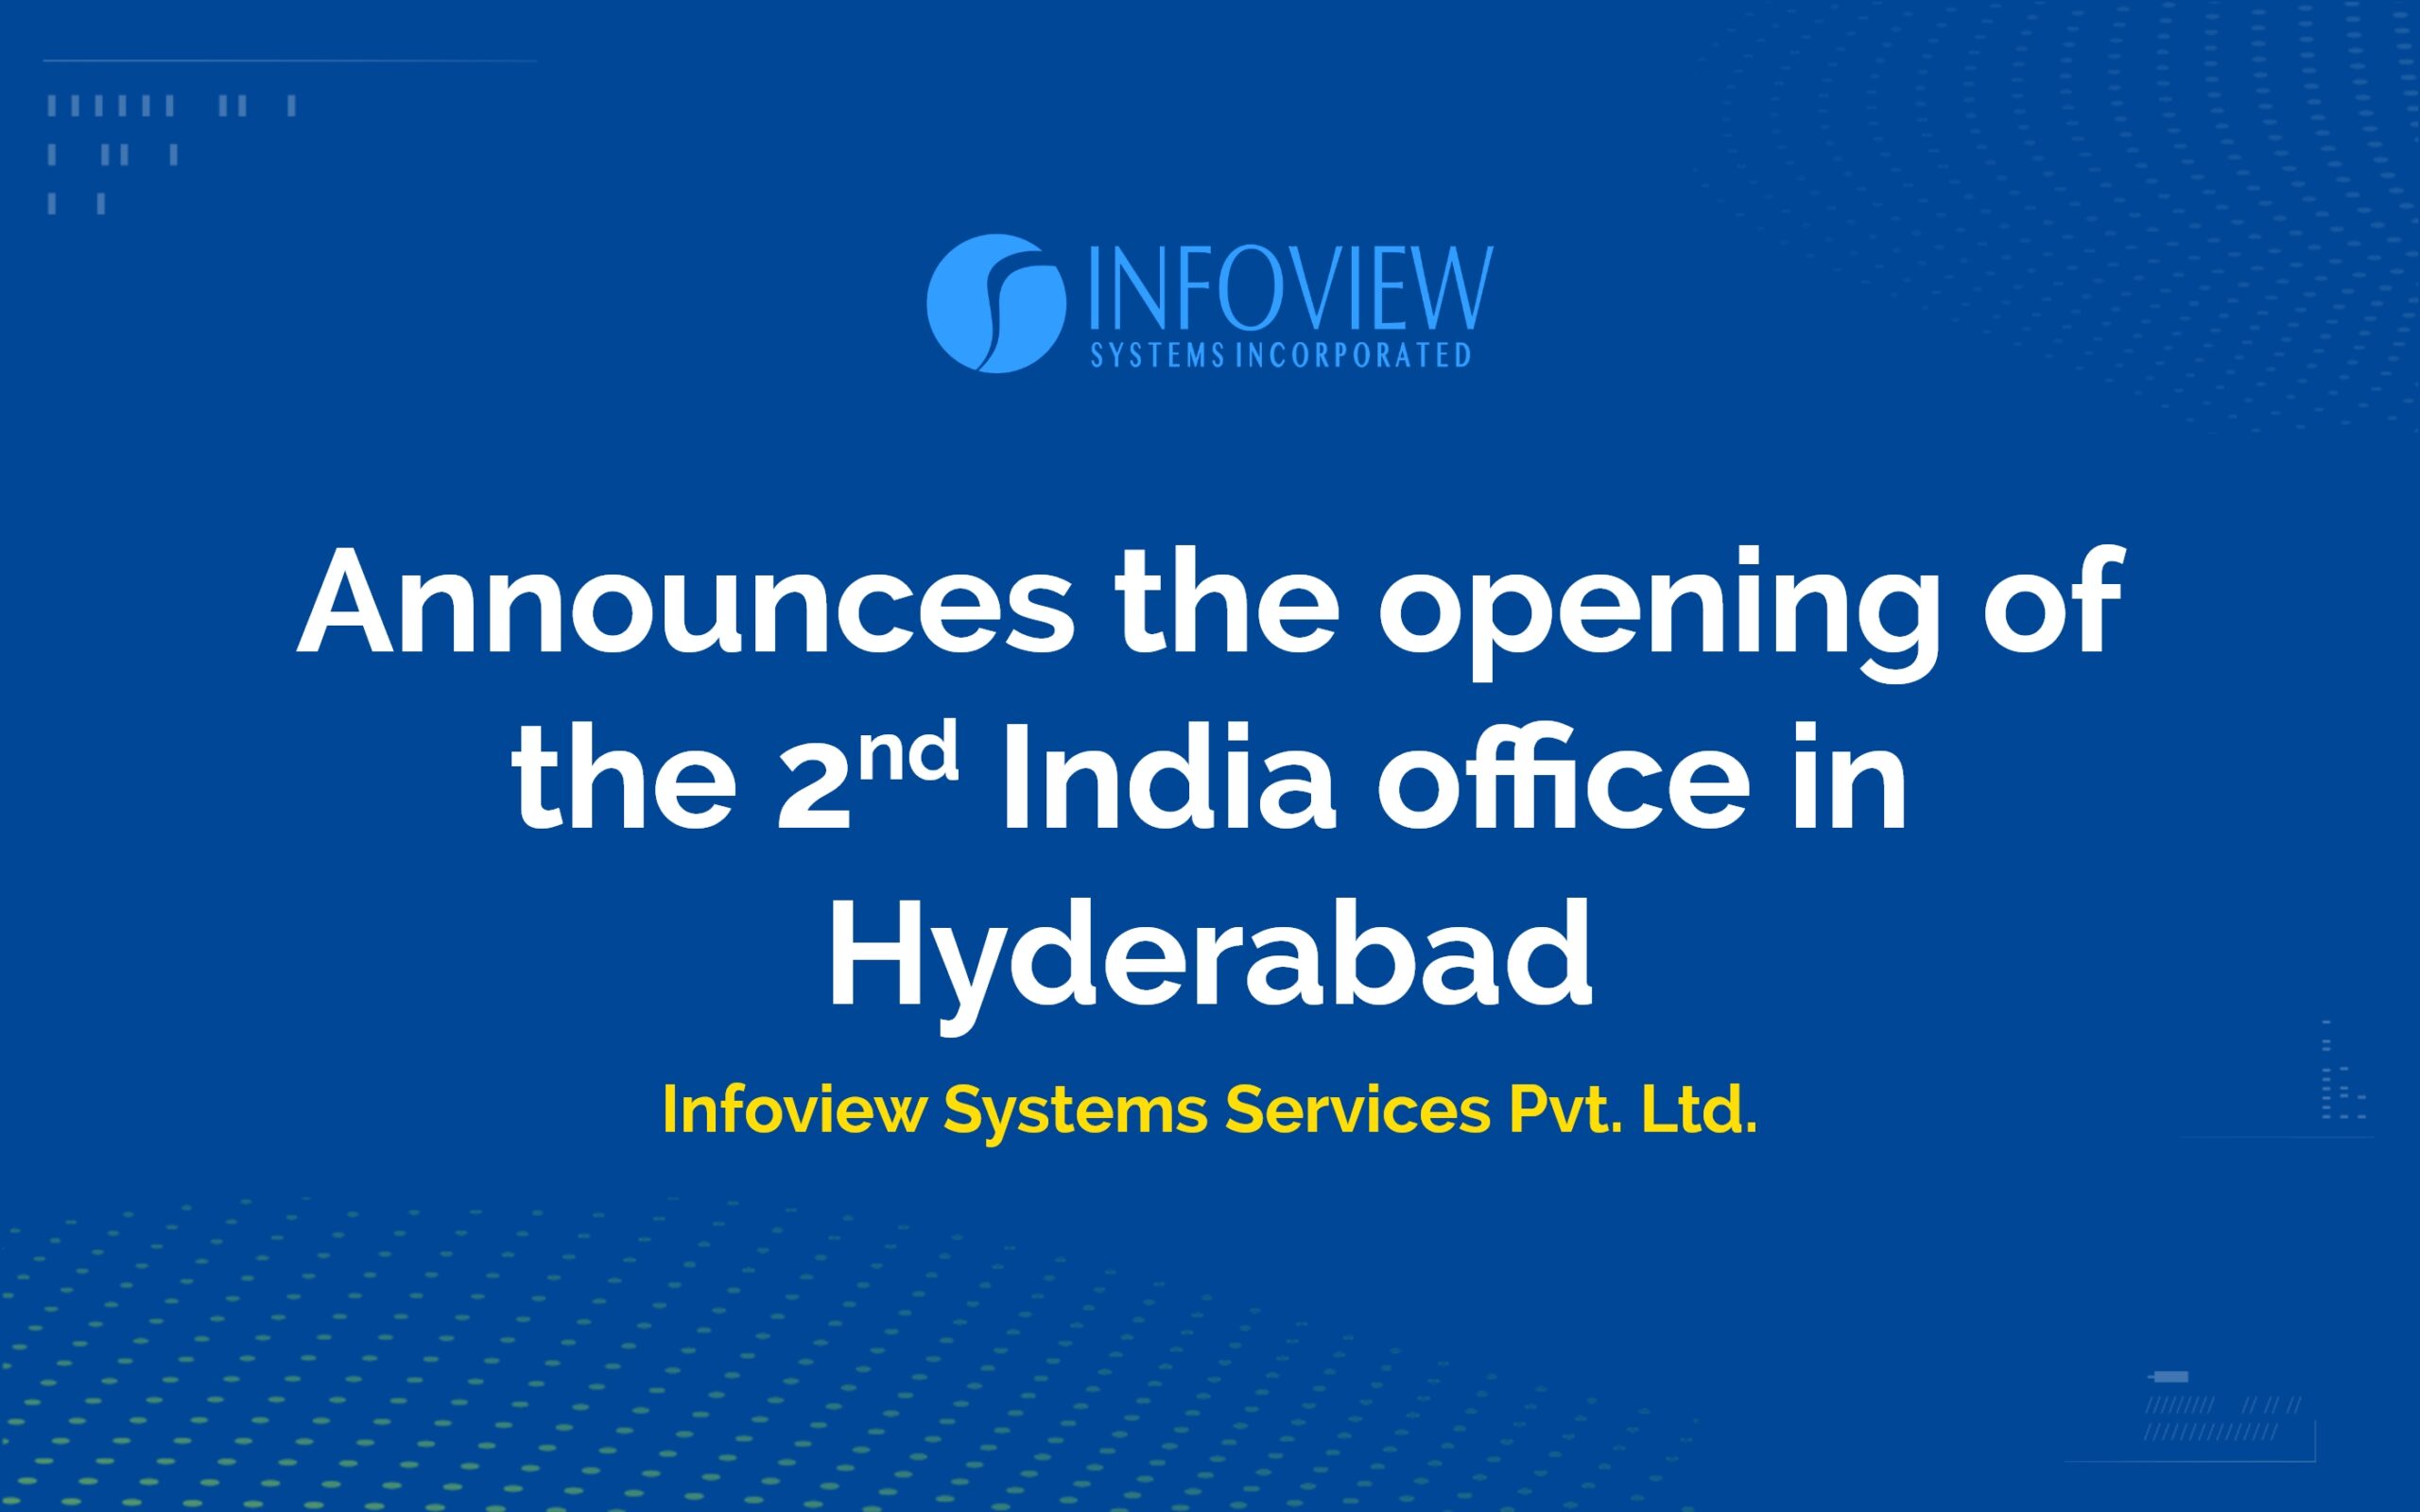 India office in Hyderabad